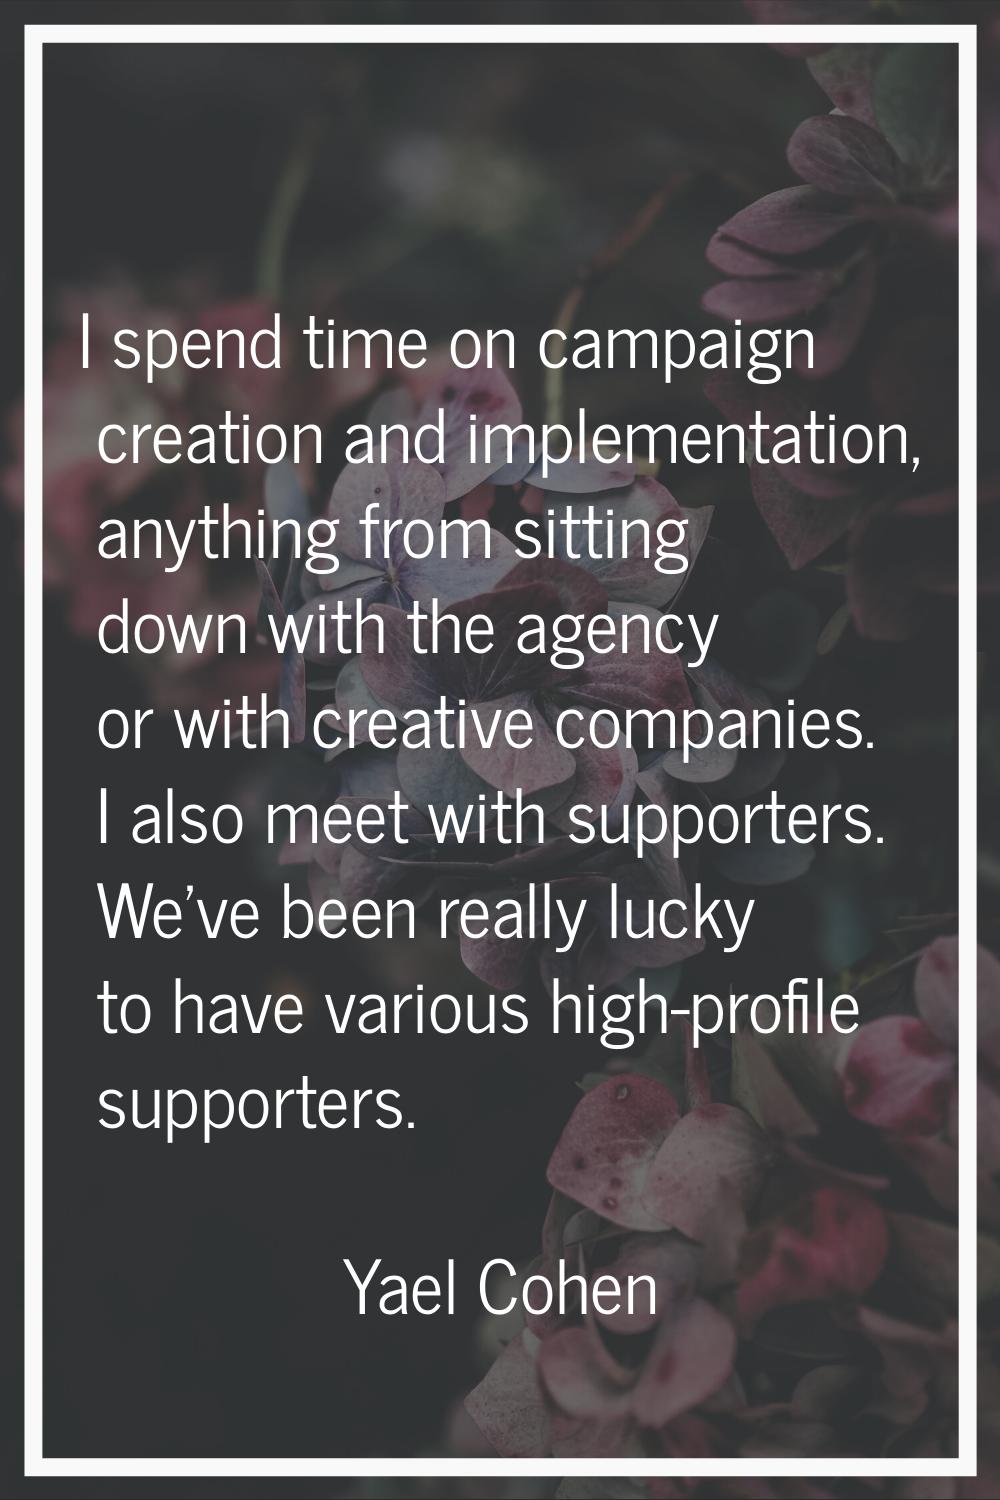 I spend time on campaign creation and implementation, anything from sitting down with the agency or